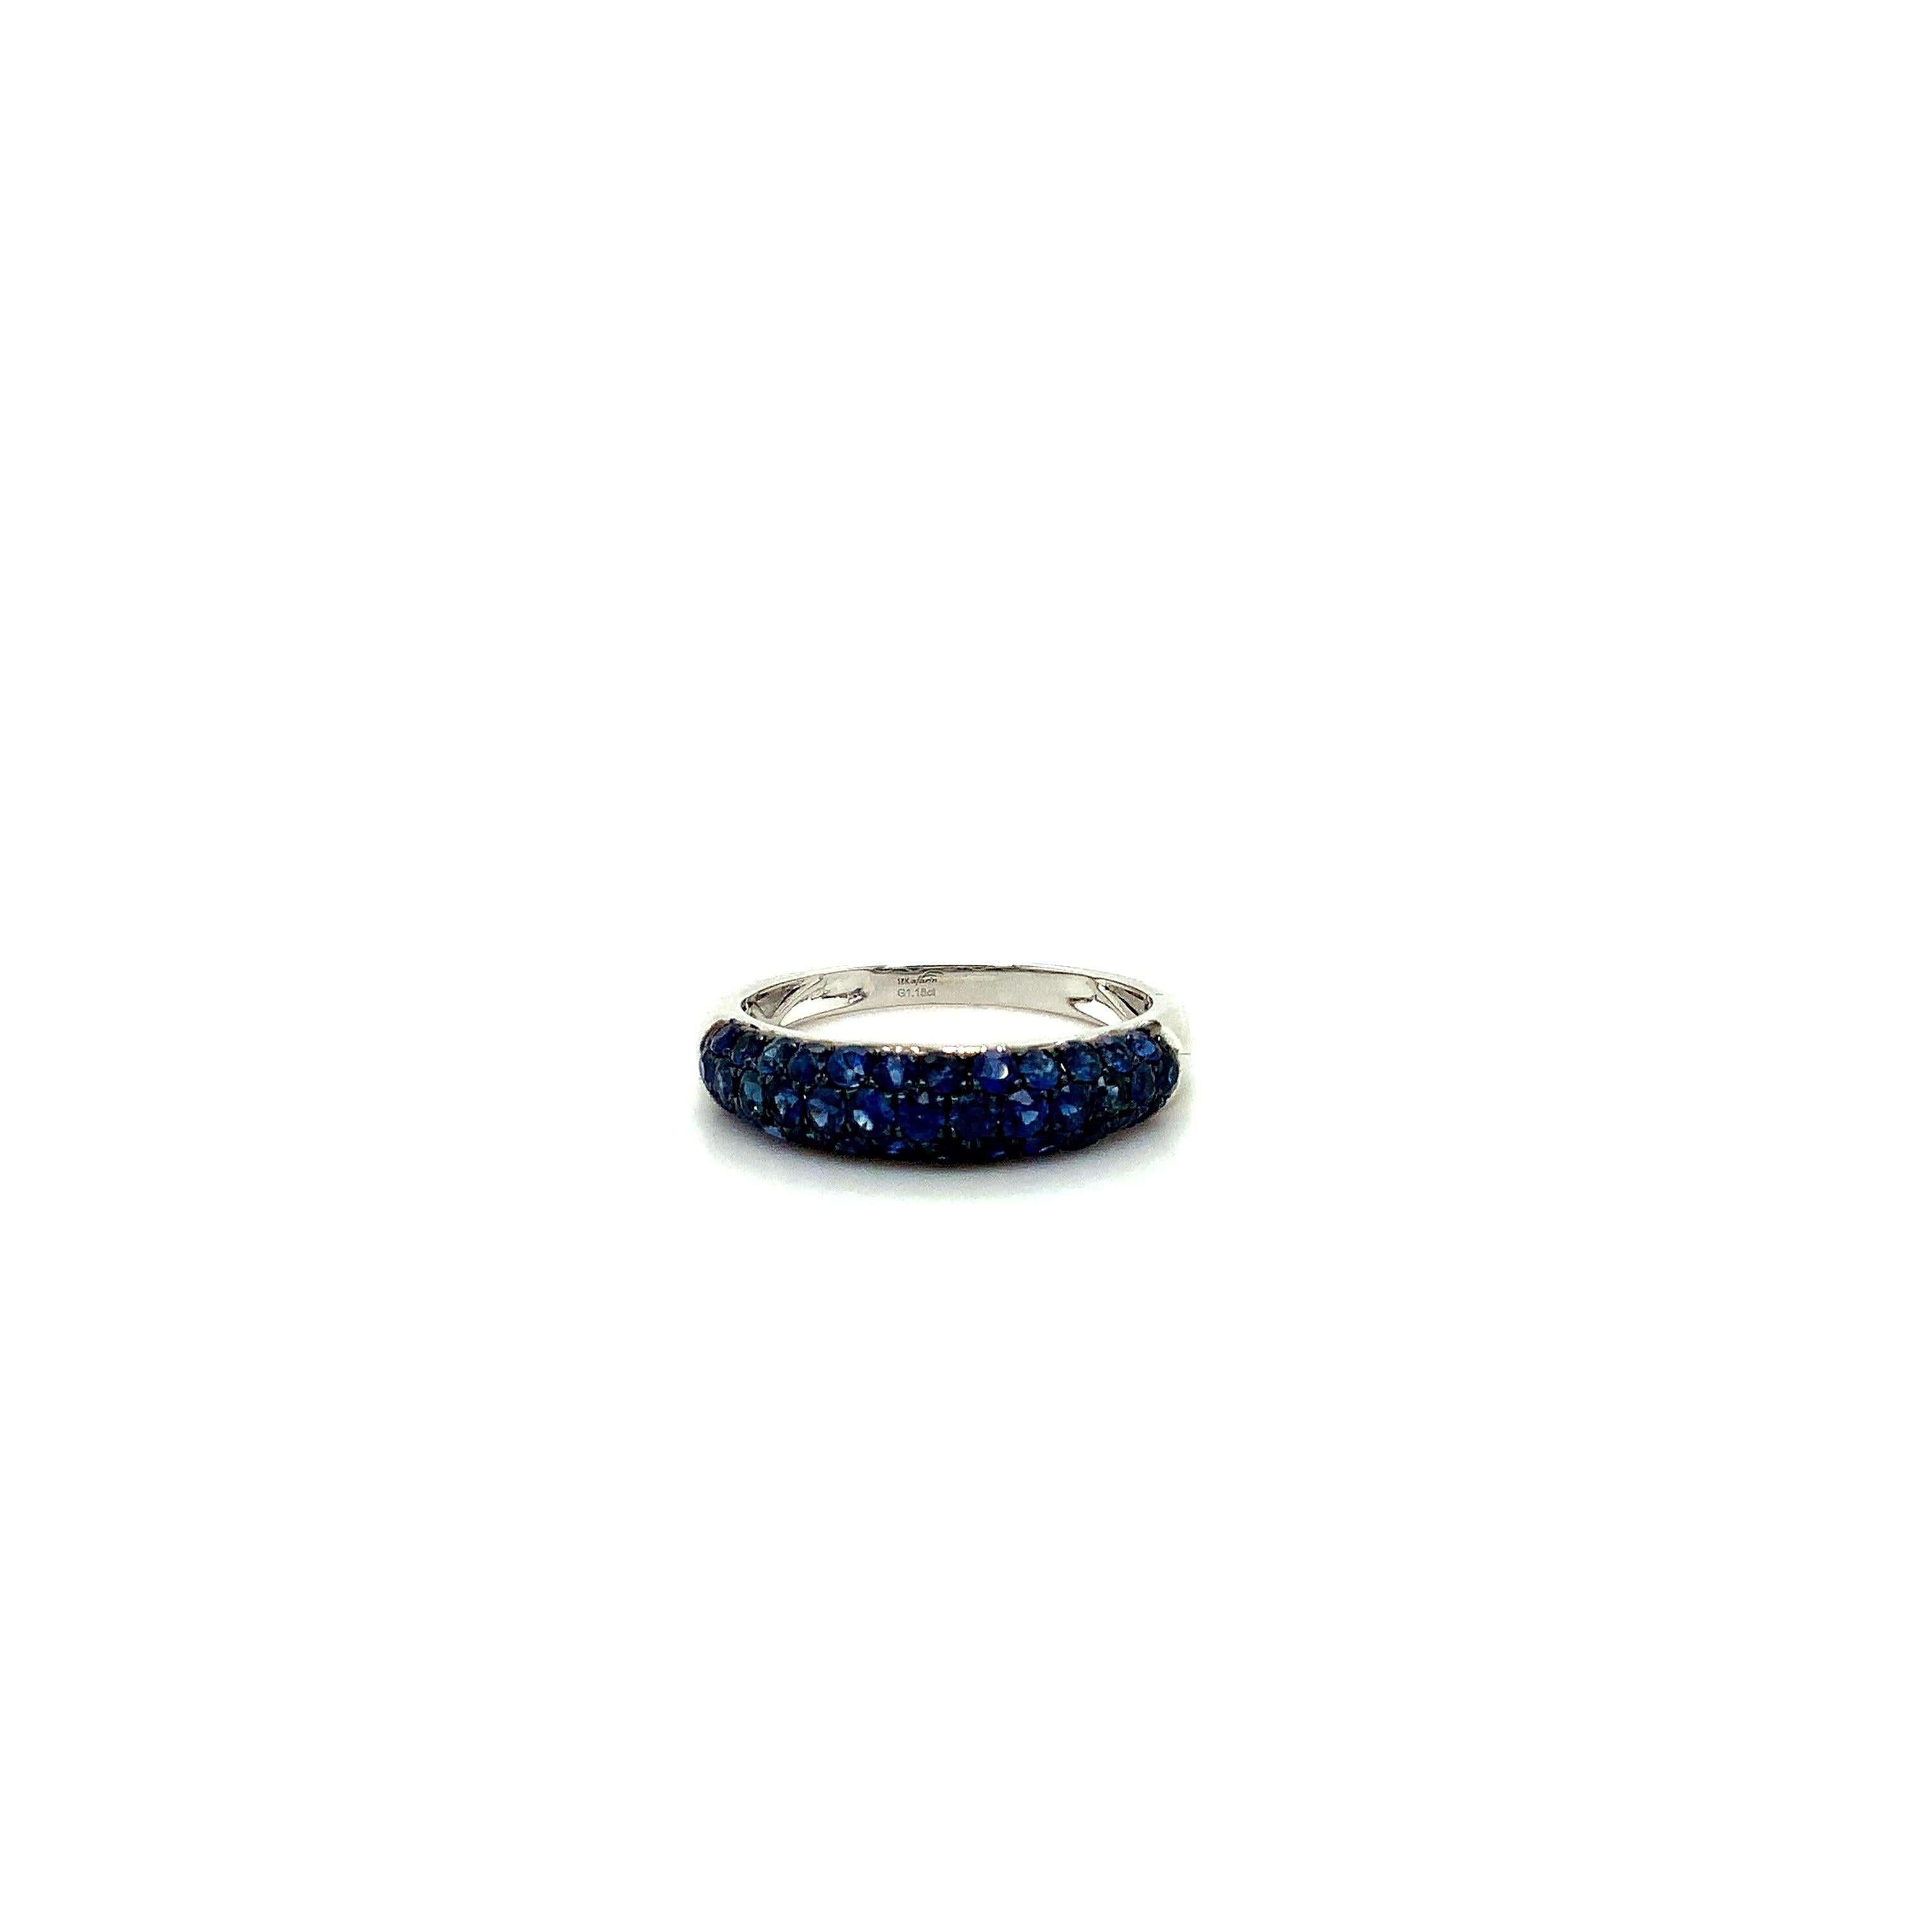 The Afarin Collection features a stunning 3-row pavé band set in 18K white gold with a black rhodium finish. The band showcases 37 round brilliant cut natural blue sapphires, totaling 1.18 carats. Each sapphire measures 4.48 x 2.12mm and boasts